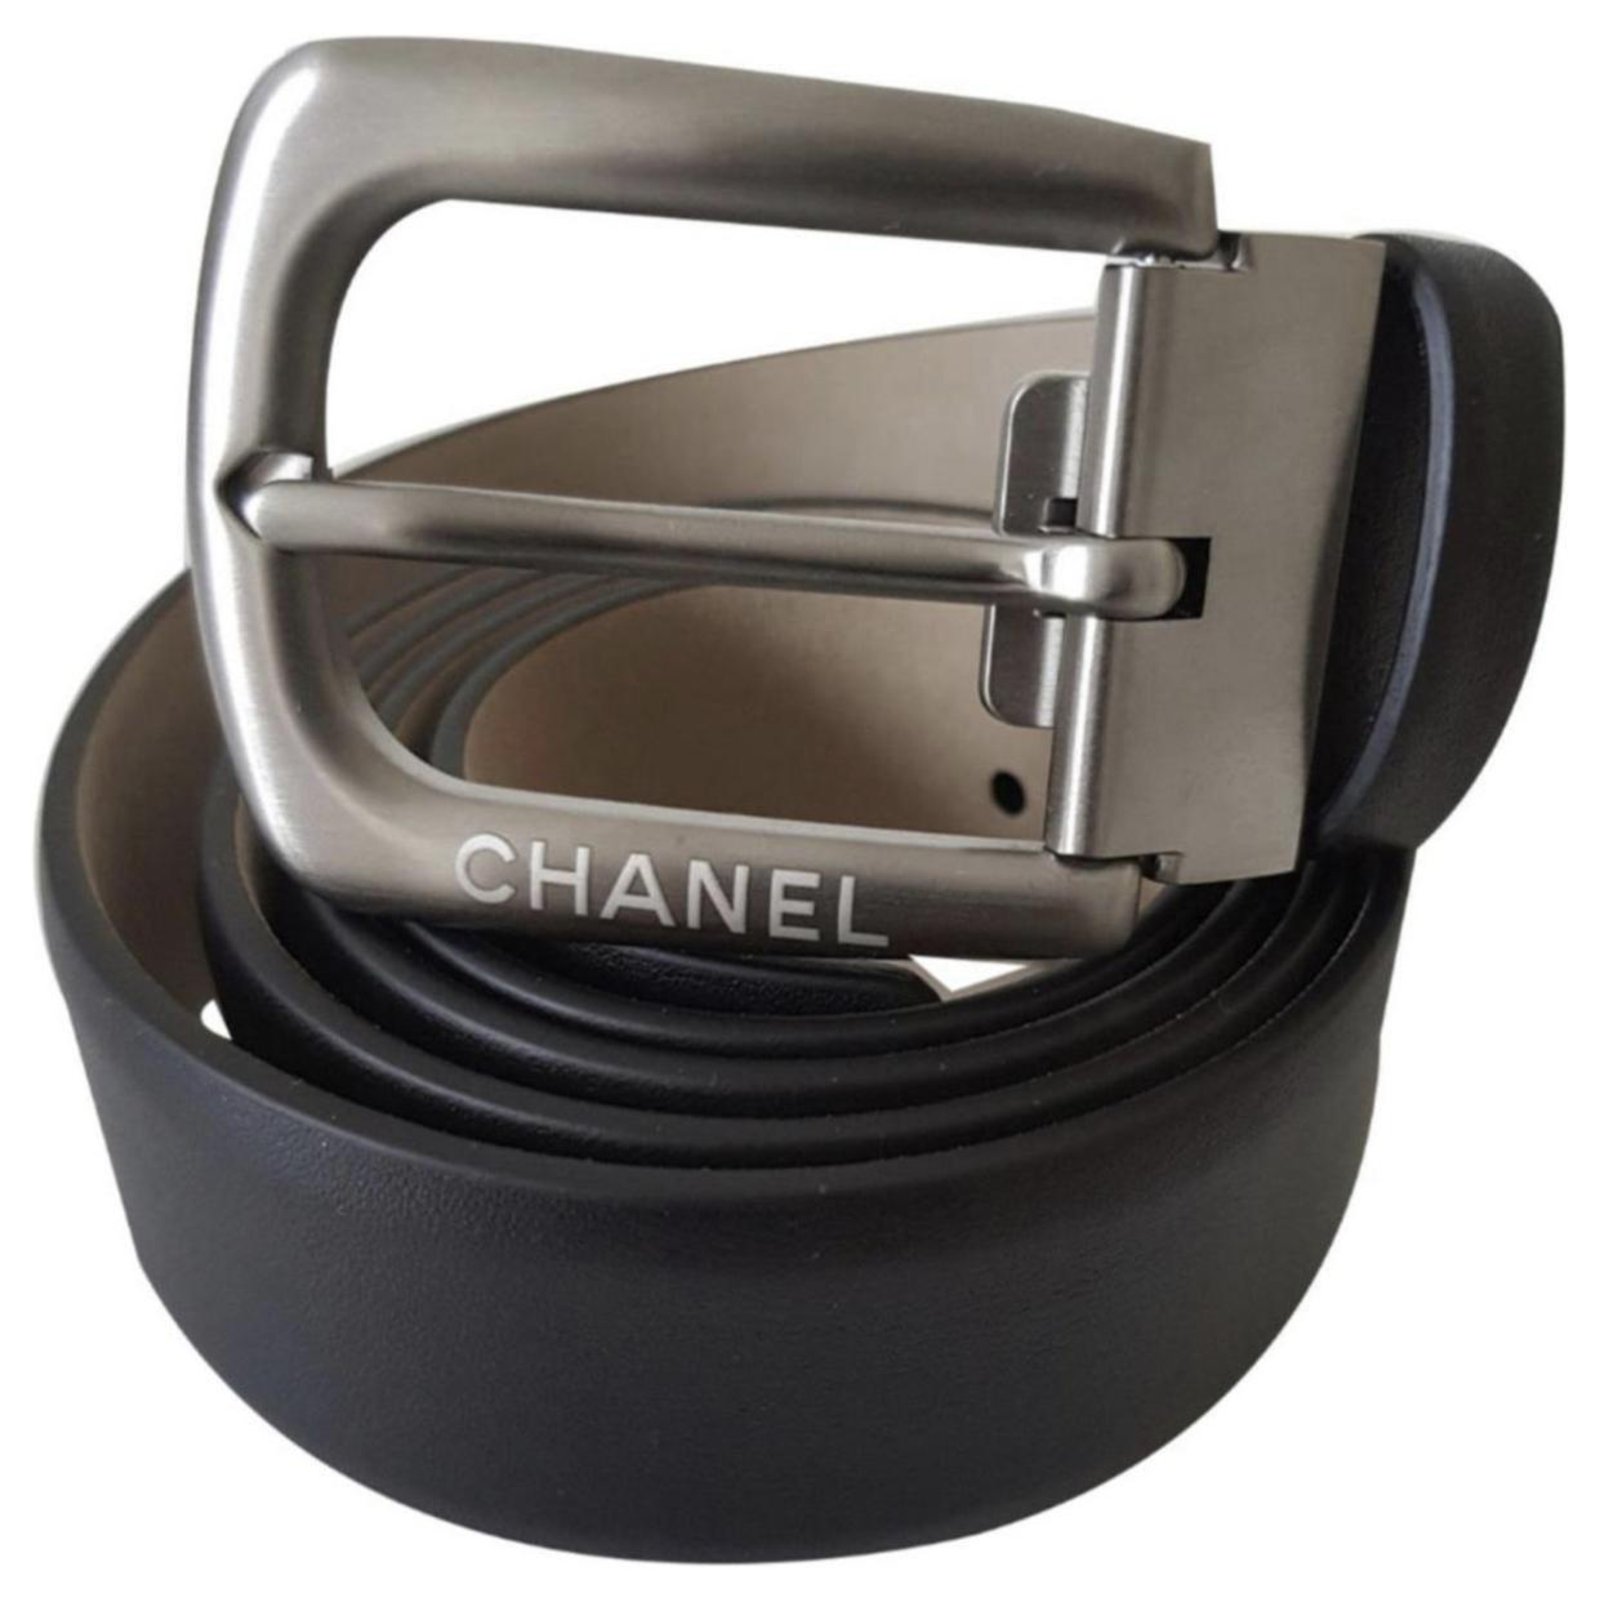 CHANEL MEN'S BELT IN CALF LEATHER NOUR / SIZE 95 / NEVER SERVED